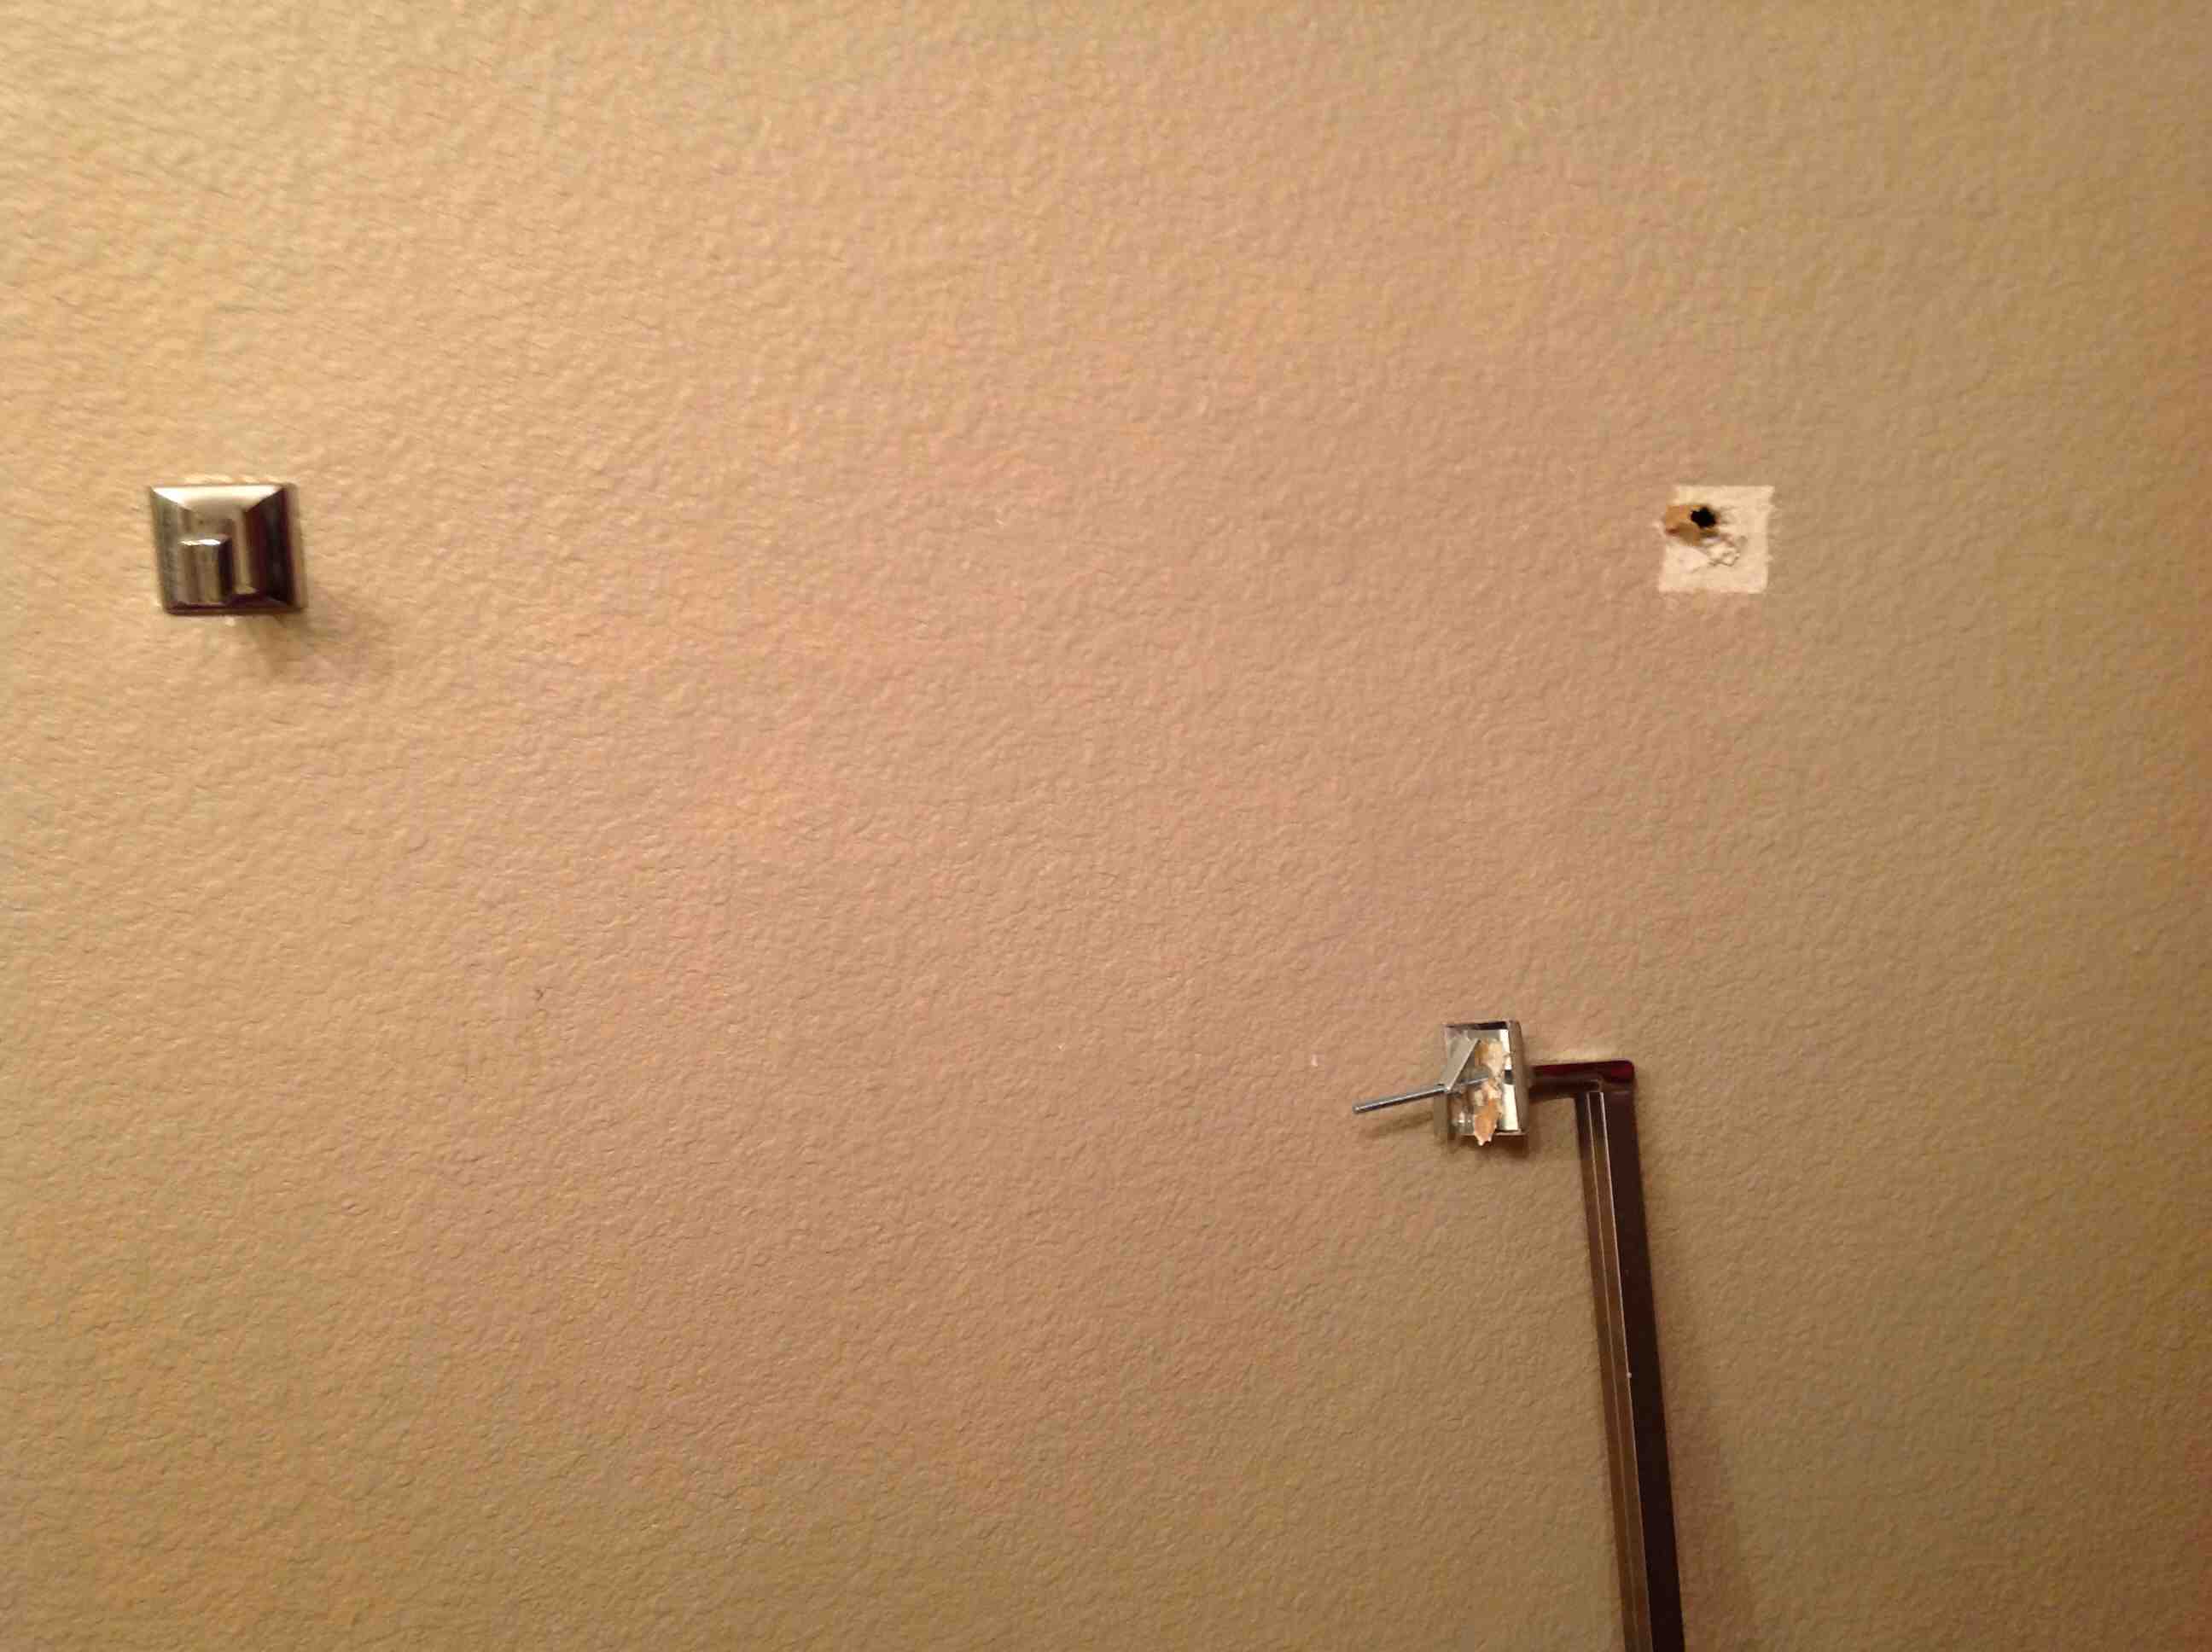 hey reddit, howto fix this towel rack I ripped out the wall : howto